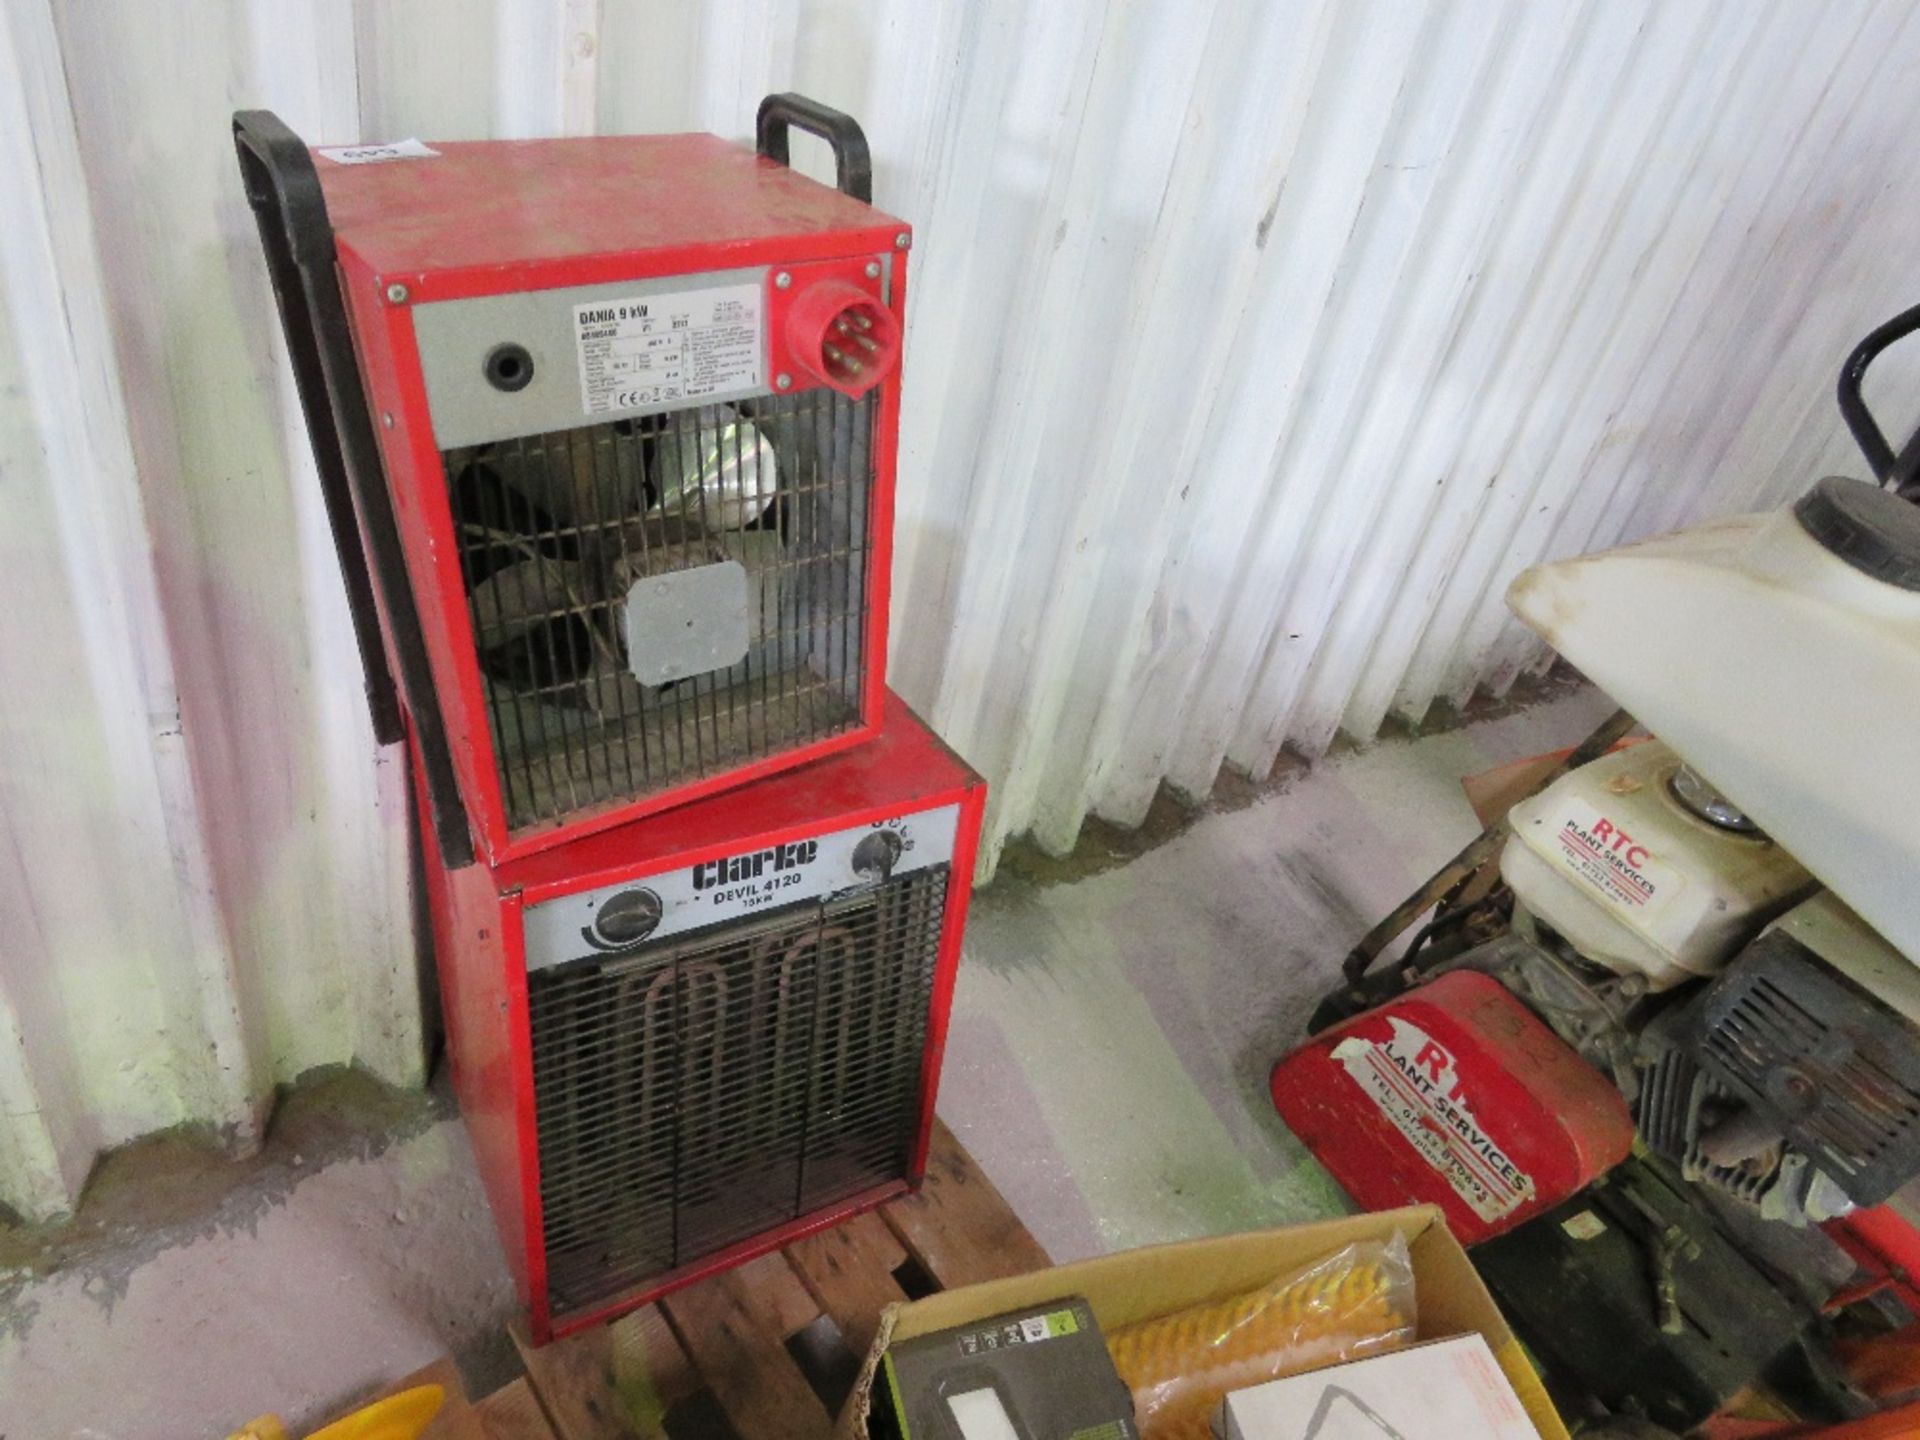 2 X 3PHASE POWERED HEATER UNITS. SOURCED FROM DEPOT CLOSURE. - Image 4 of 4